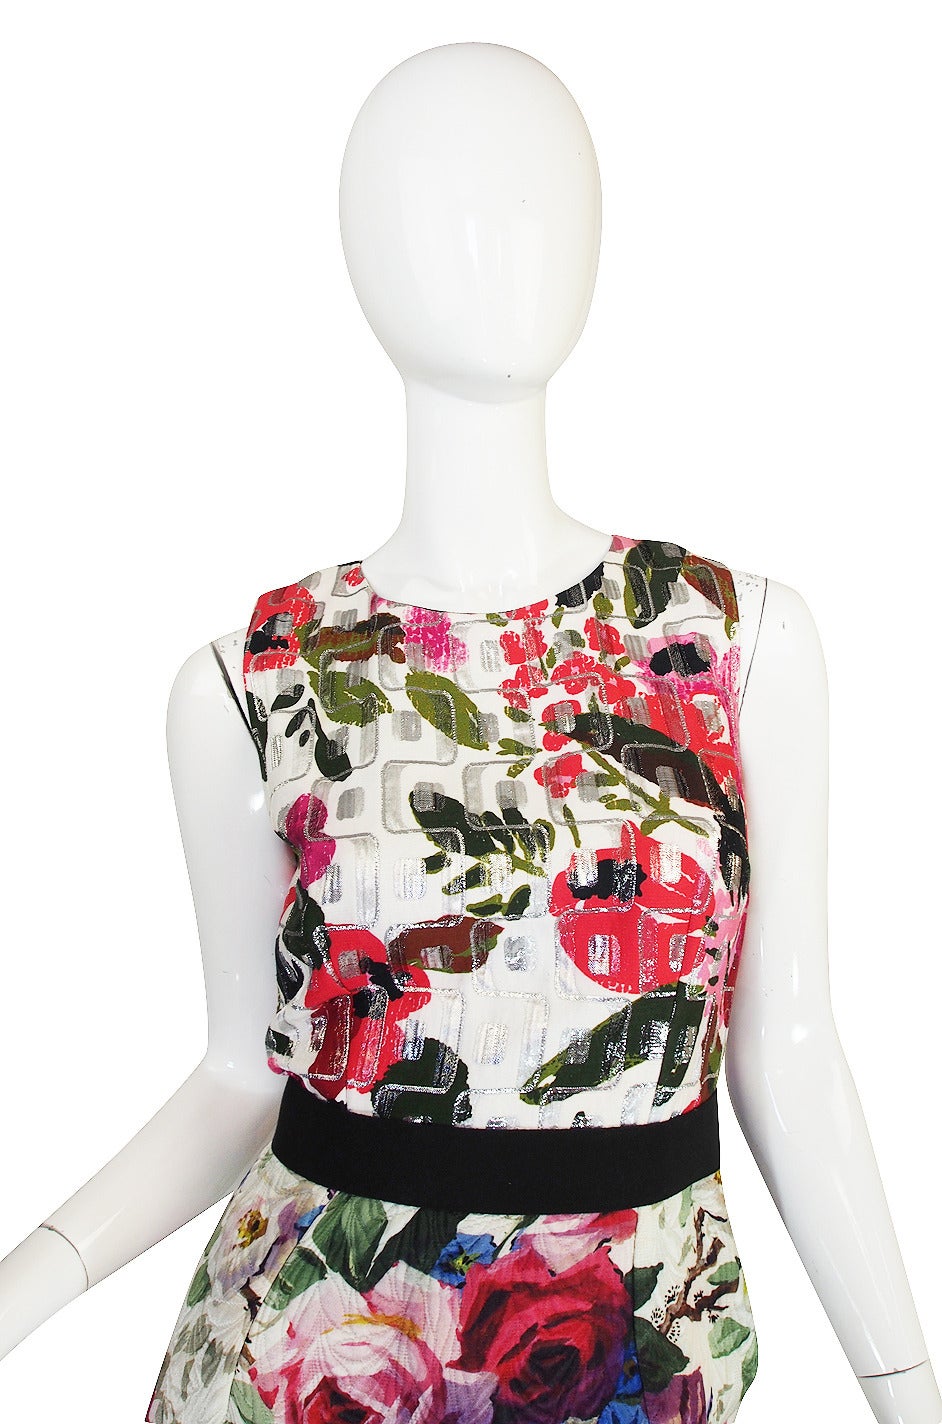 Recent Dolce & Gabbana Fitted Floral & Metallic Dress In Excellent Condition For Sale In Rockwood, ON